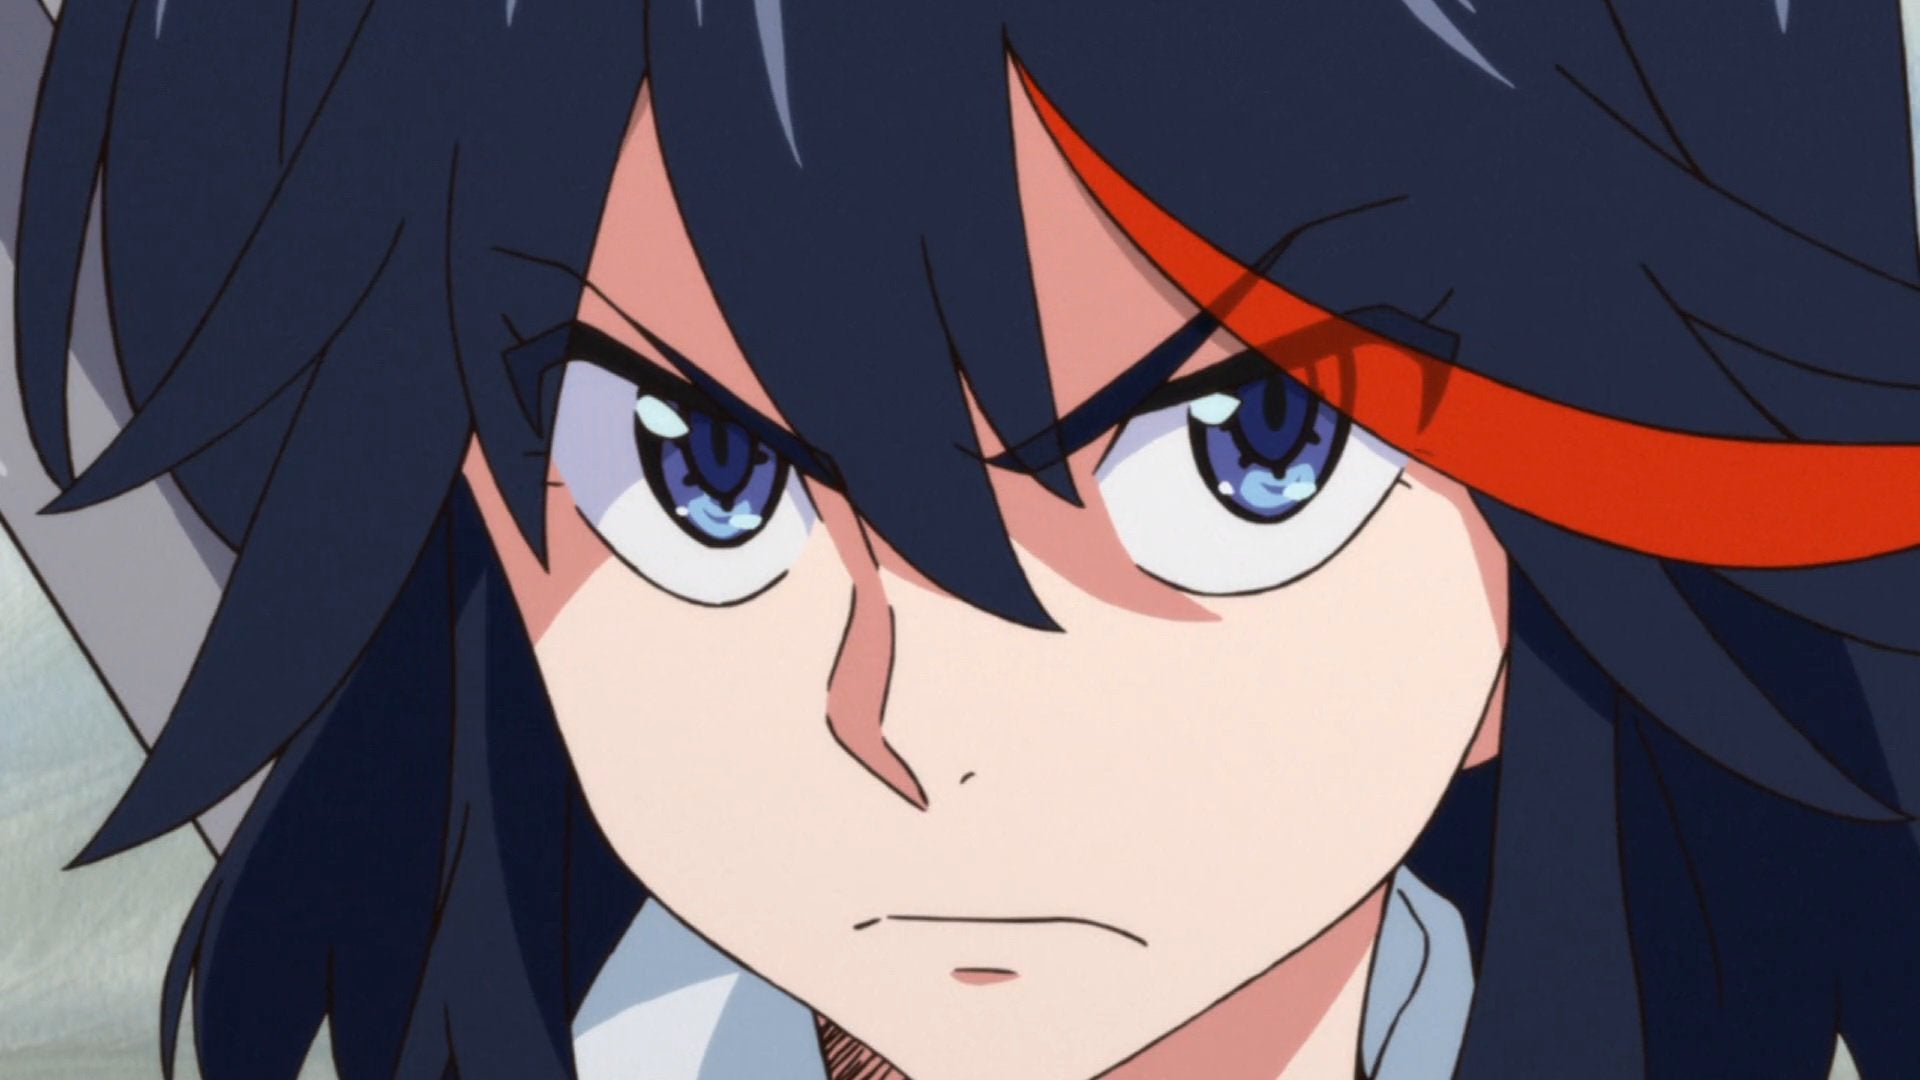 Spoilers mostly x kill la kill wallpapers ive collected ranime